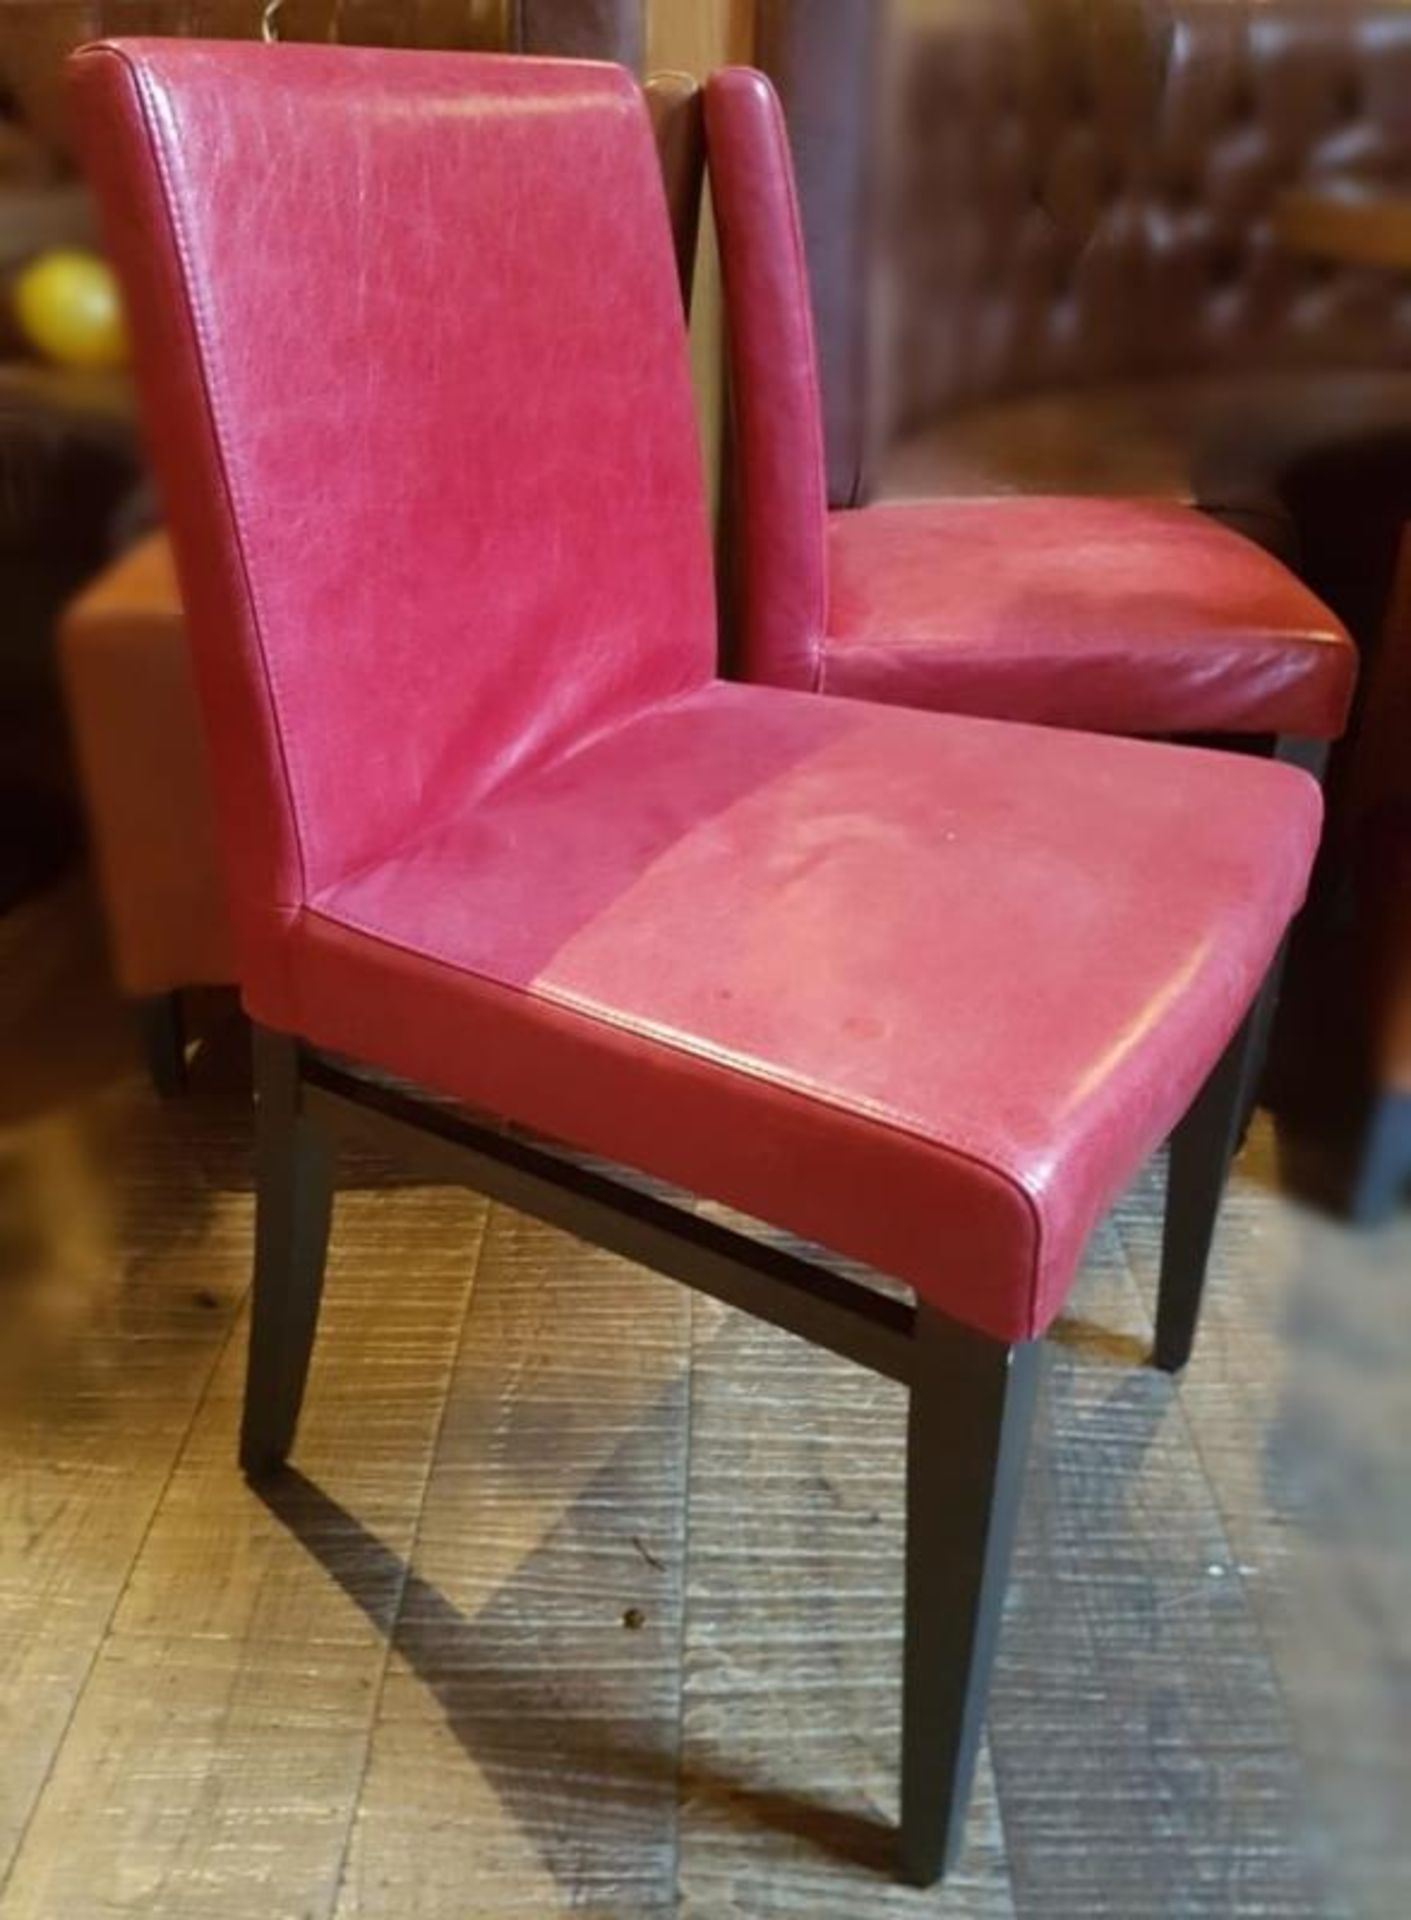 7 x Hard-wearing Red Leather Upholstered Commercial Dining Chairs - Recently Removed From A City Cen - Image 3 of 4